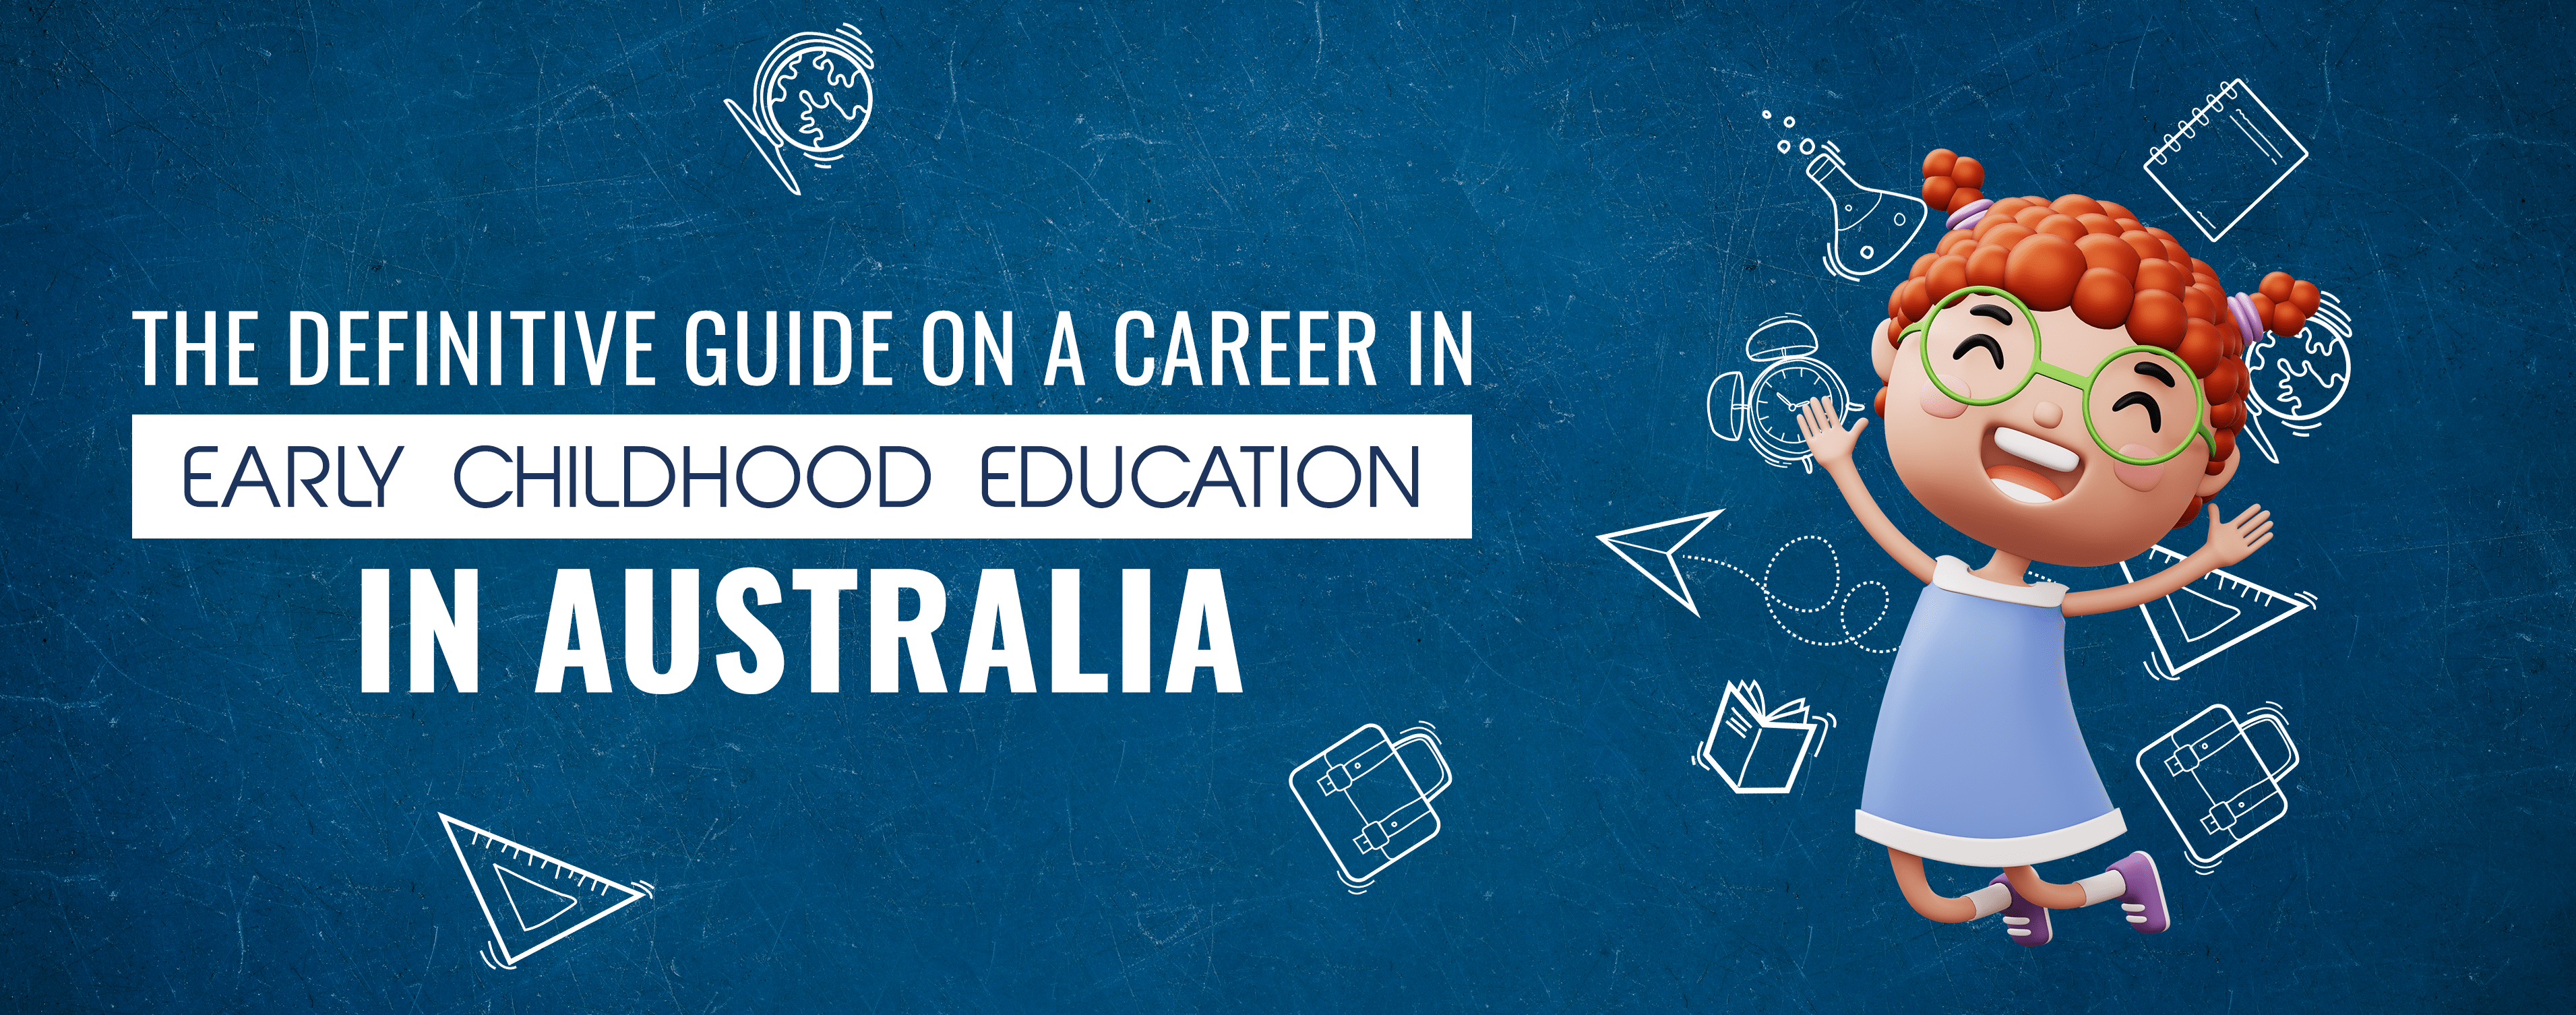 Definitive Guide on a Career in Early Childhood Education in Australia